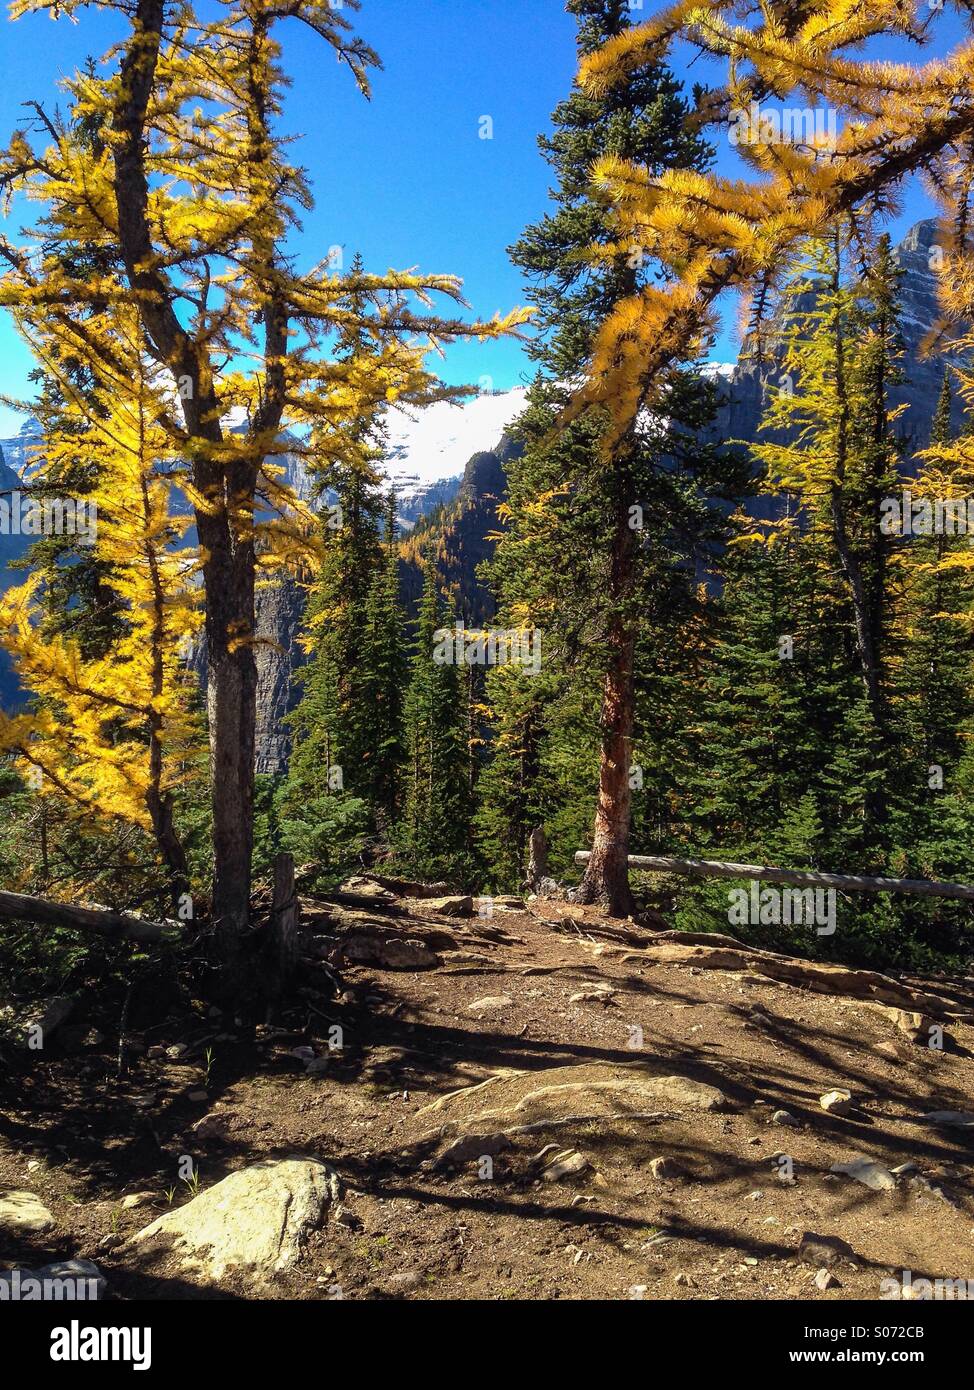 Larch Trees in Autumn, Banff NP, Canada Stock Photo